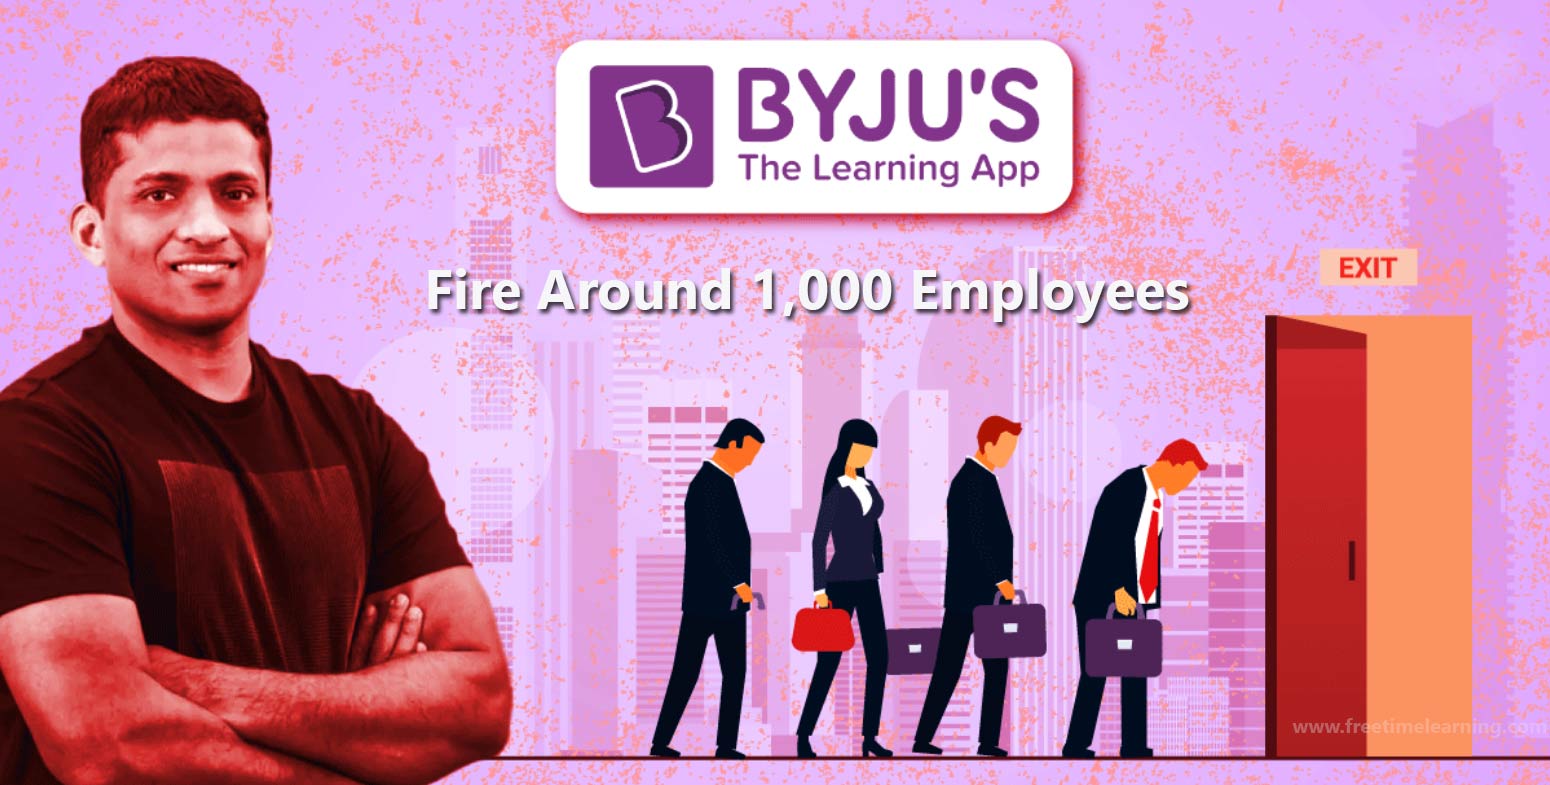 Byju's To Fire Around 1,000 Employees